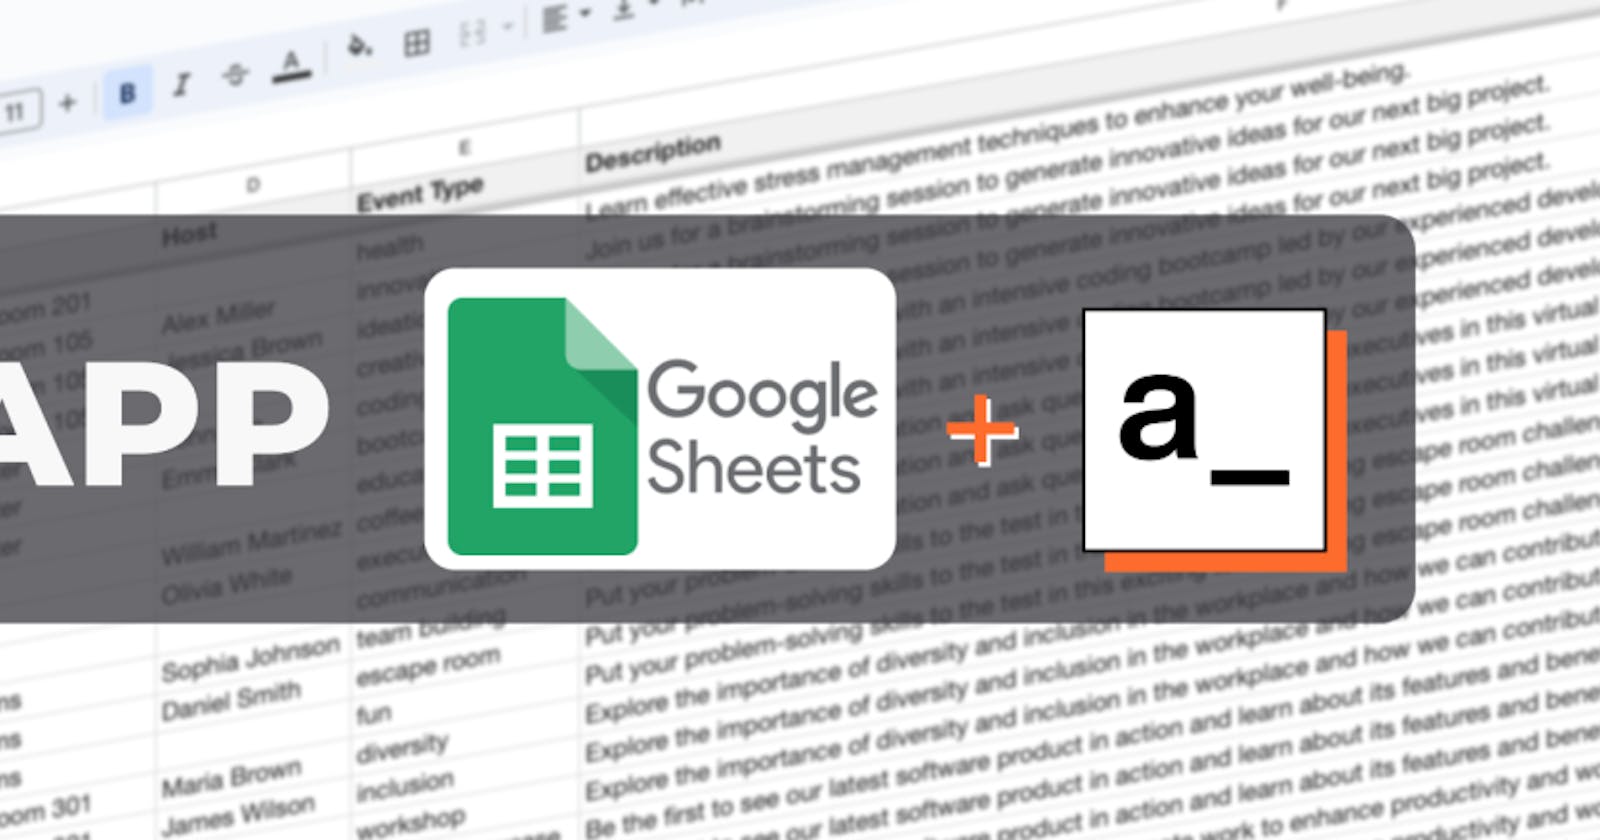 Building a CRUD app with Google Sheets